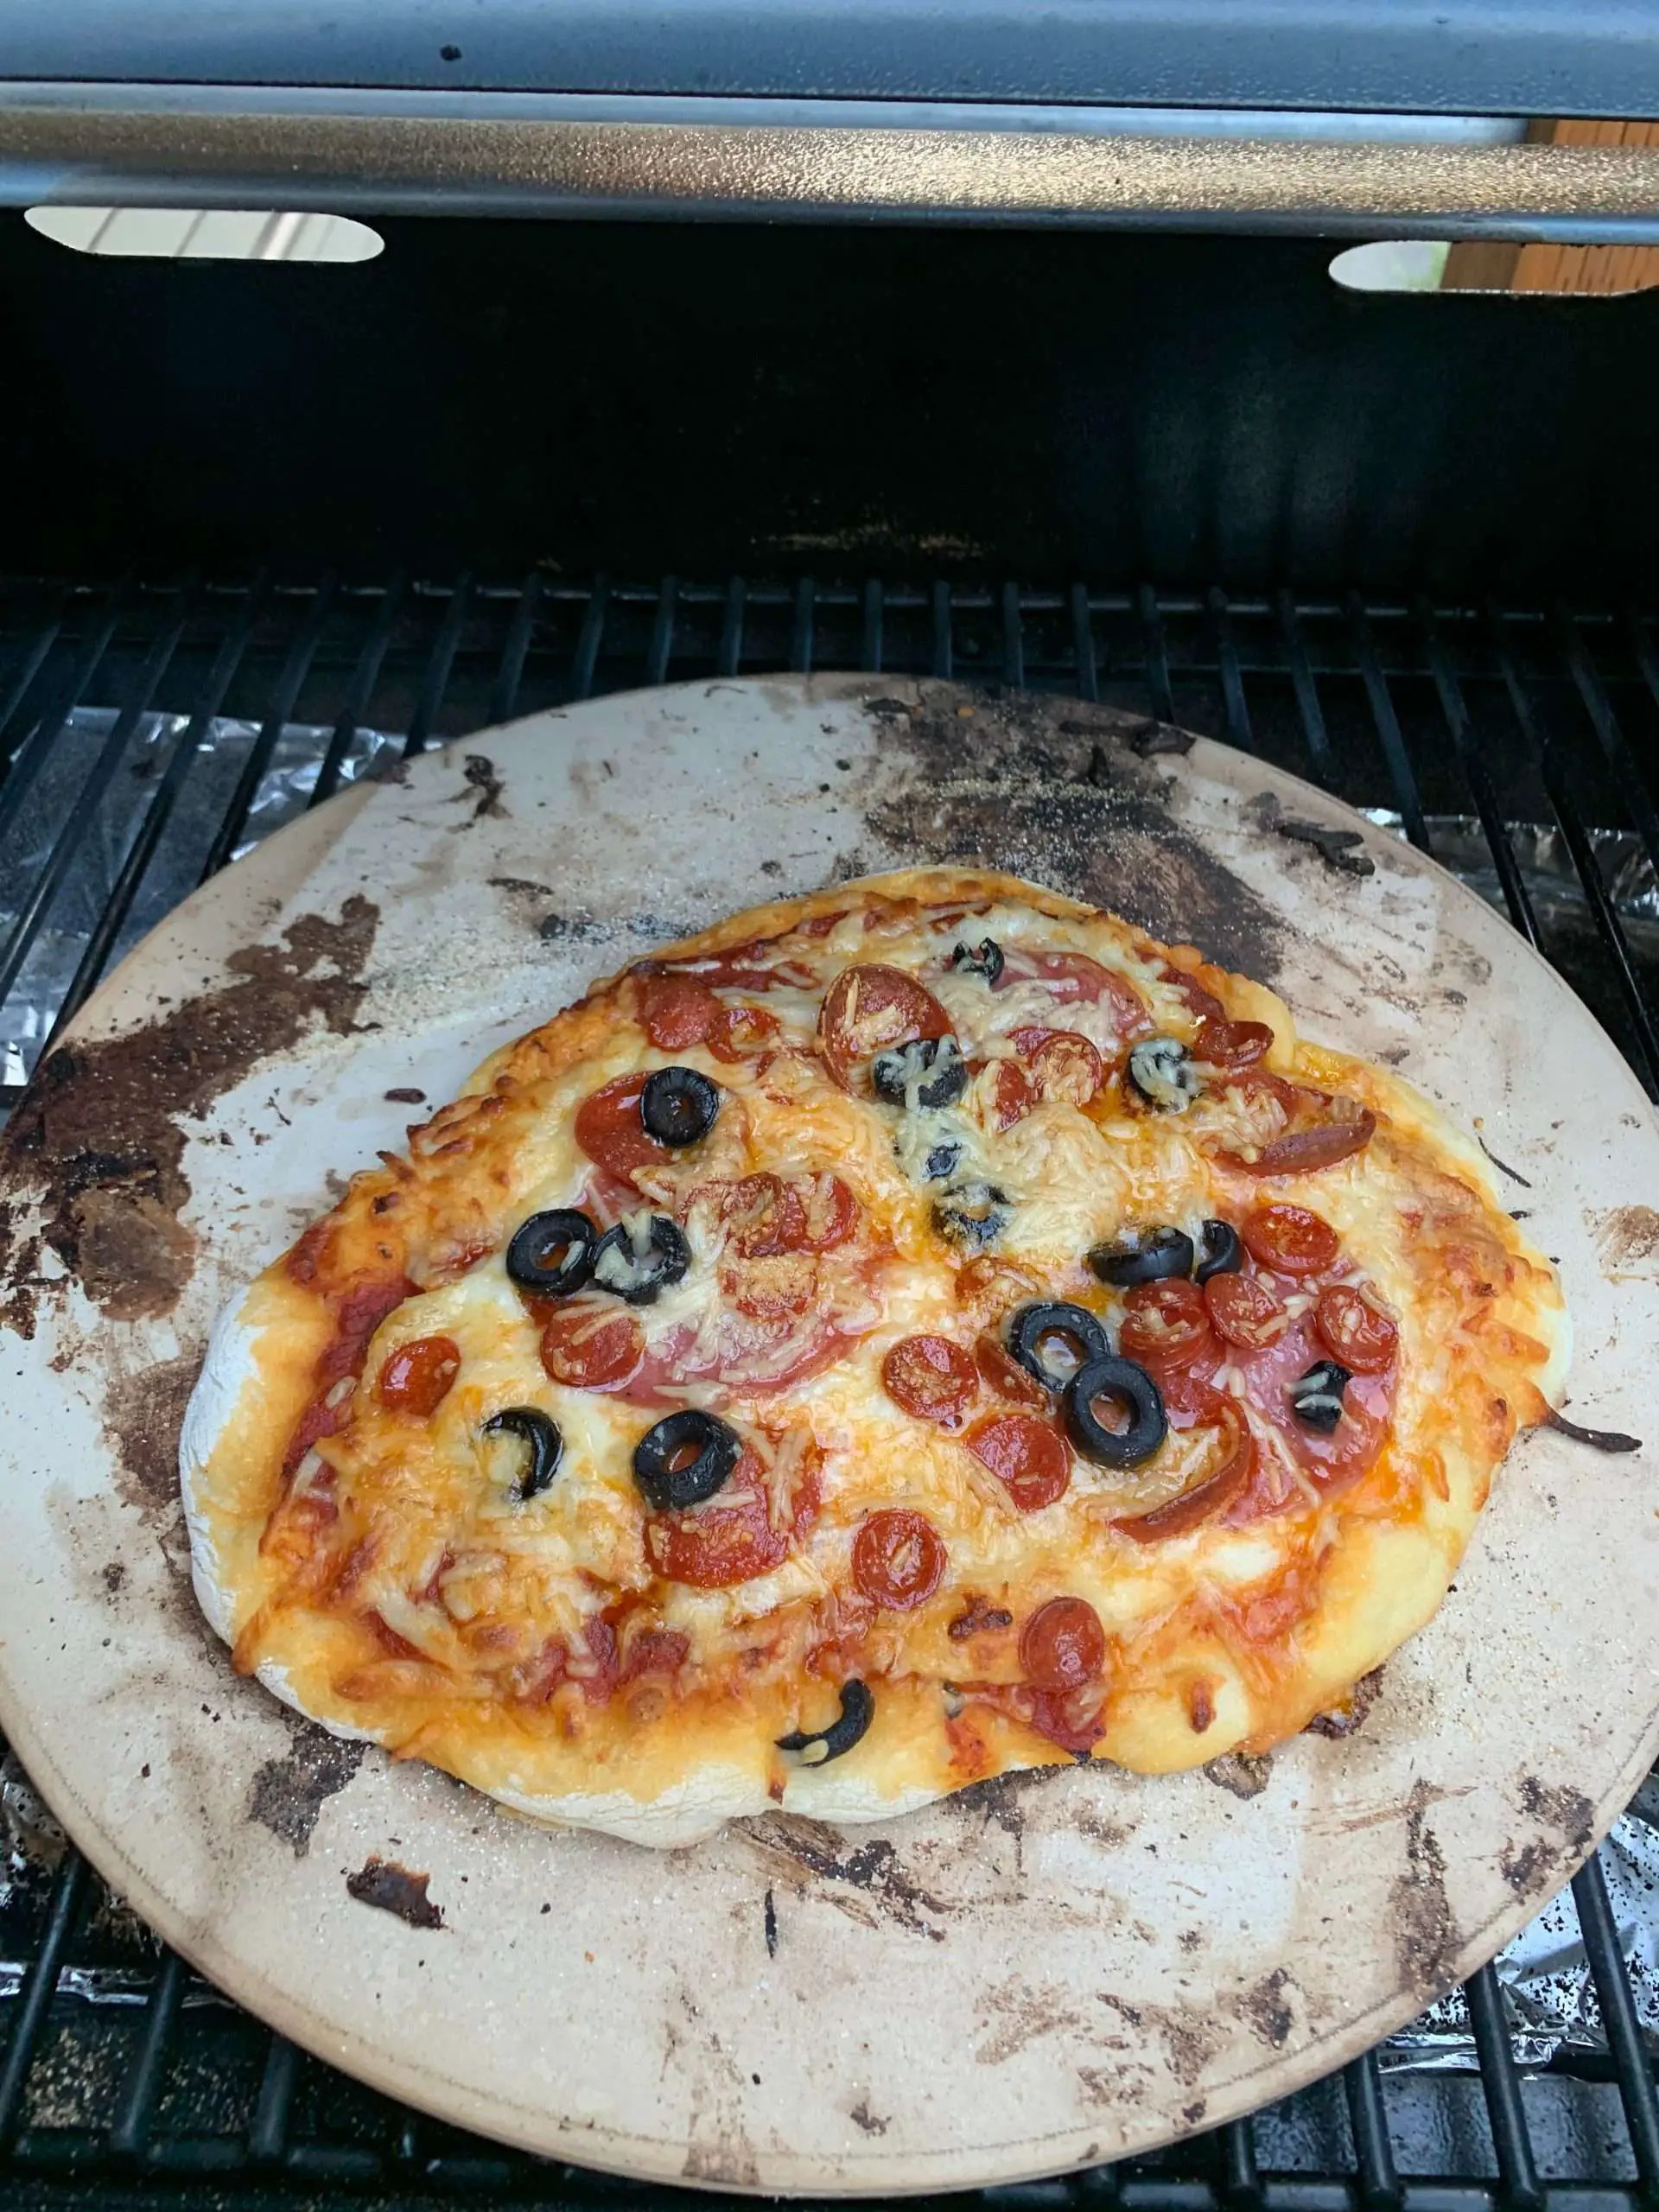 Pizza on a stone in a Traeger grill